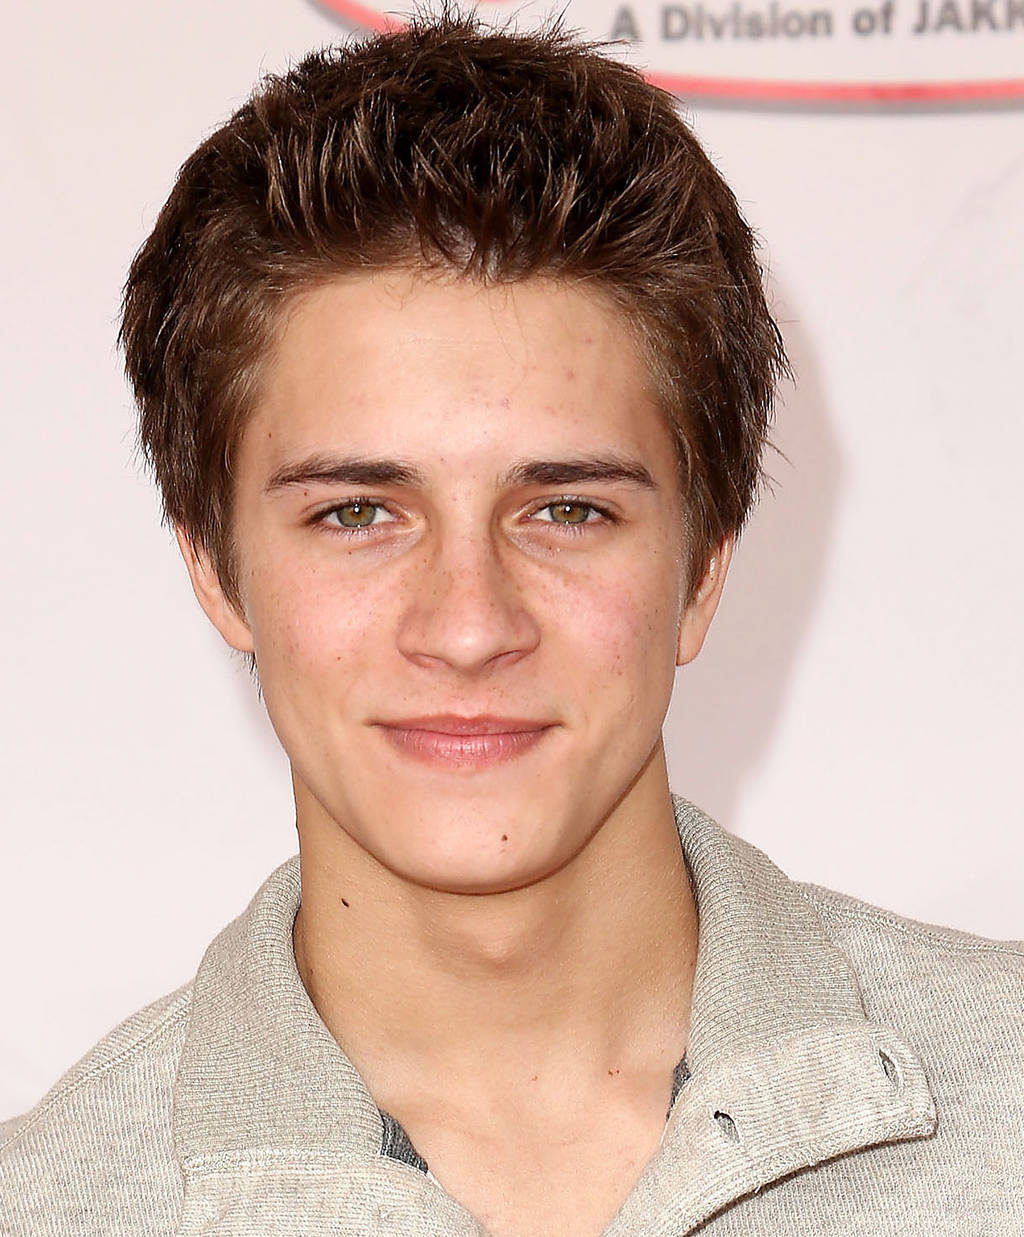 Actor Billy Unger - age: 26